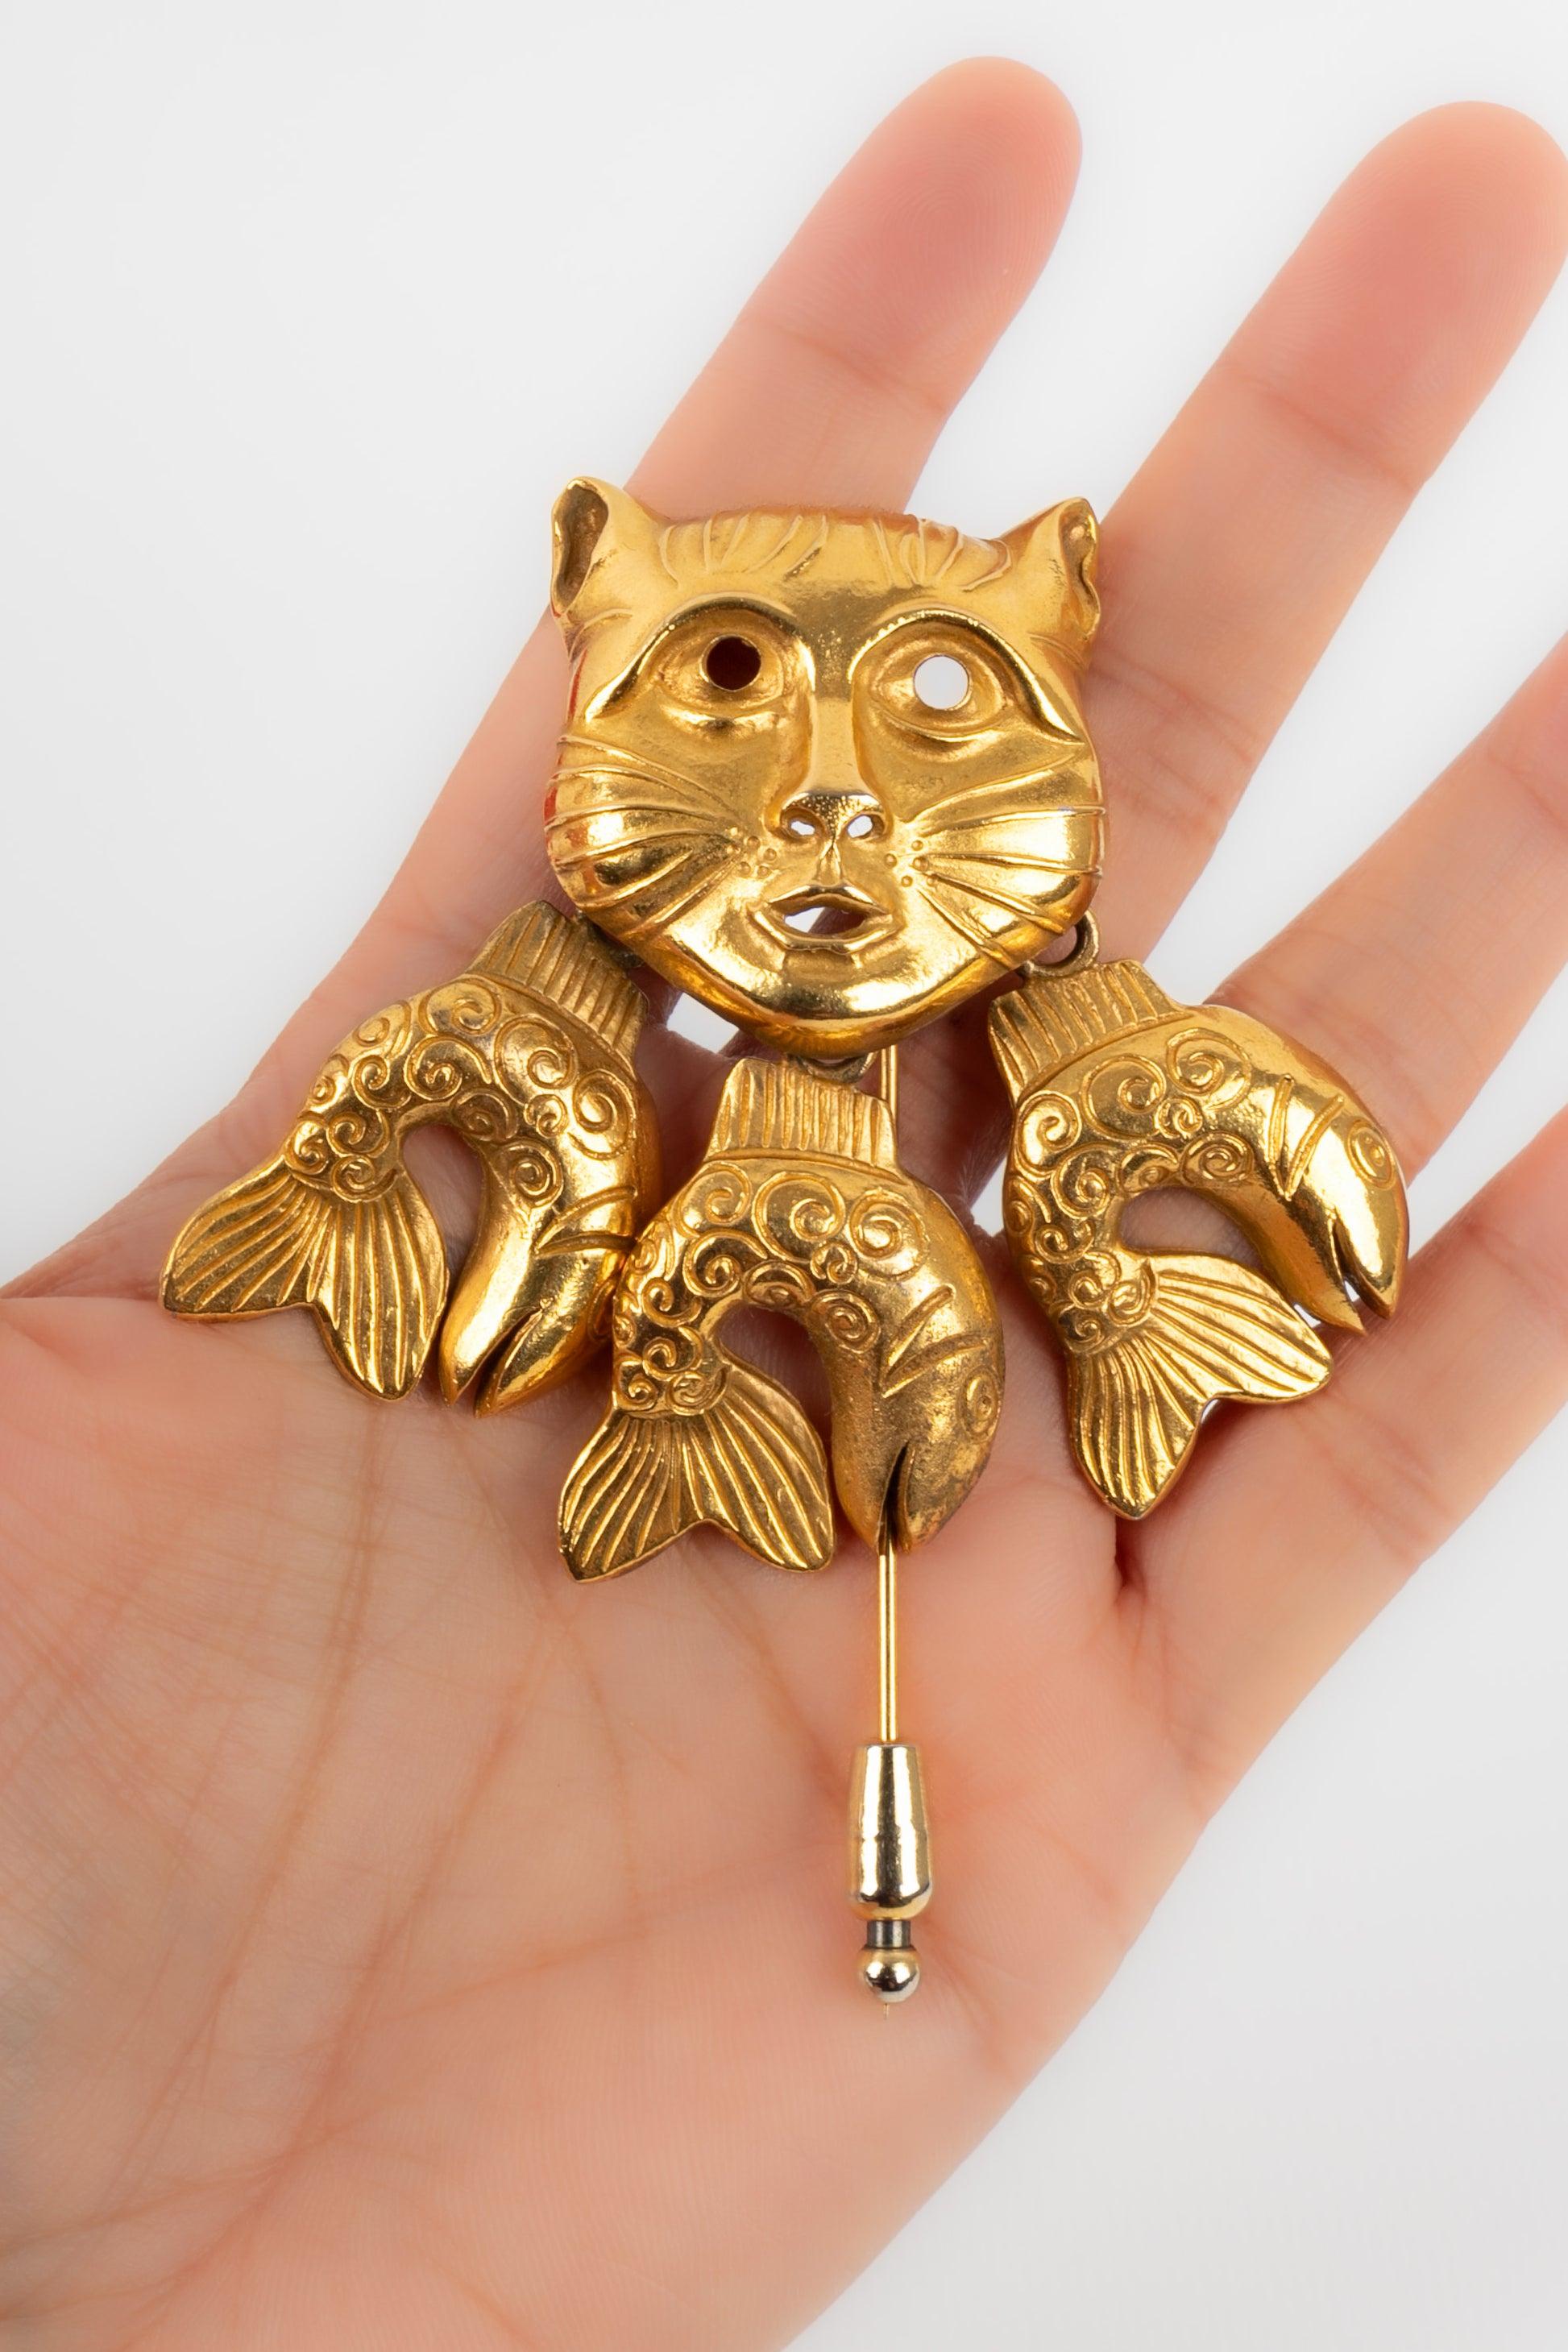 Isabel Canovas - Articulated brooch in gold-plated metal representing a cat and fish.

Additional information:
Condition: Very good condition
Dimensions:  6 cm x 5 cm

Seller Reference: BR69
